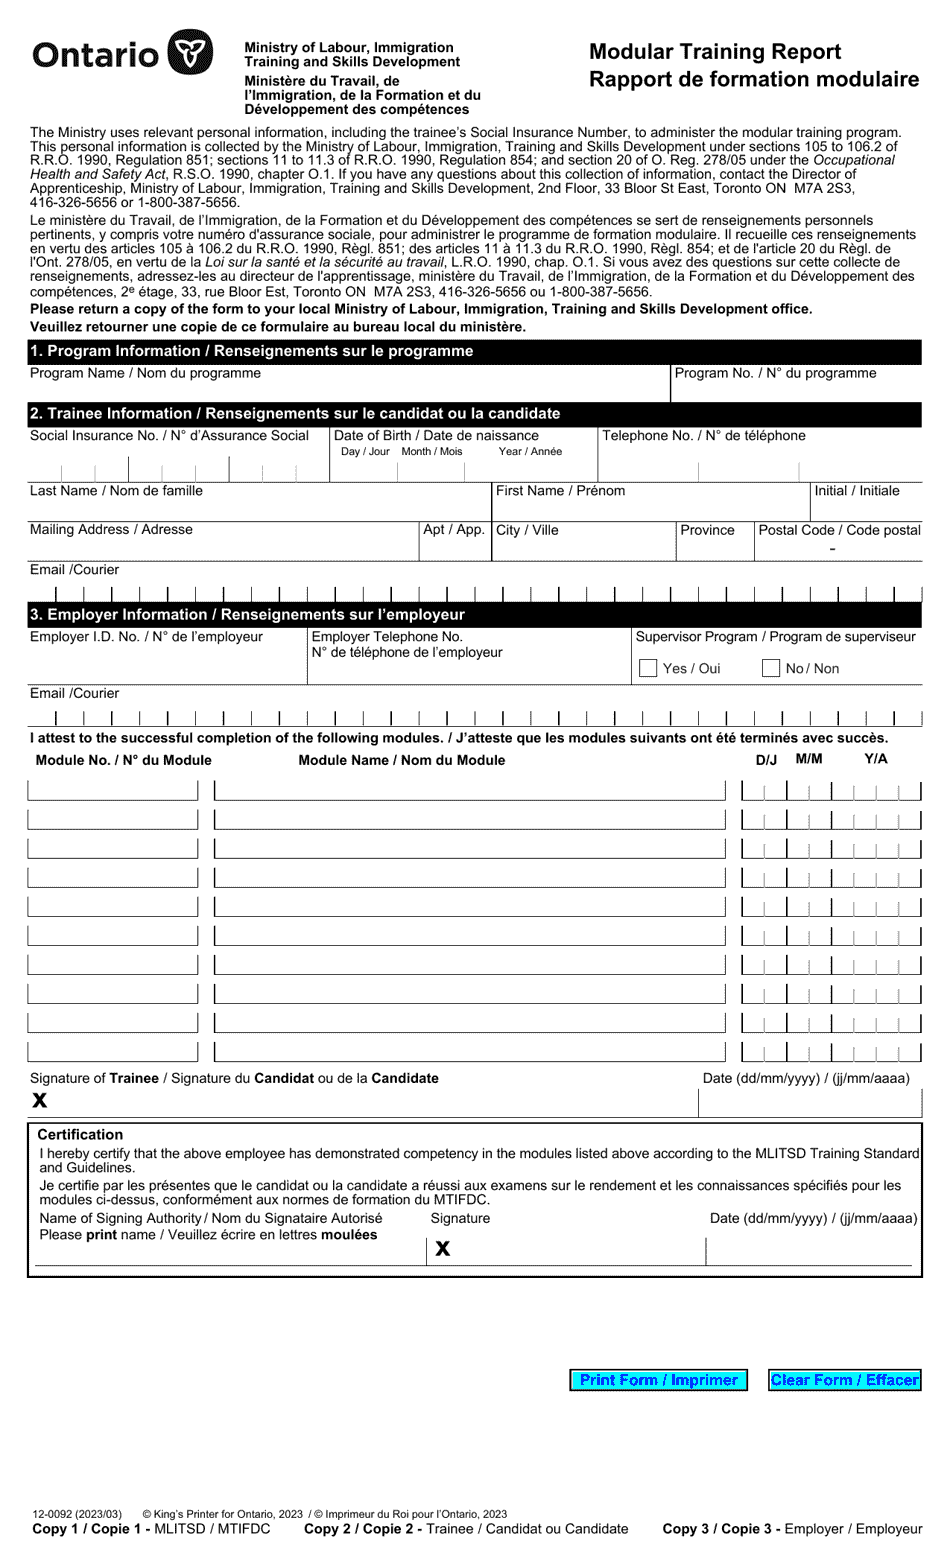 Form 12-0092 Modular Training Report - Ontario, Canada (English / French), Page 1